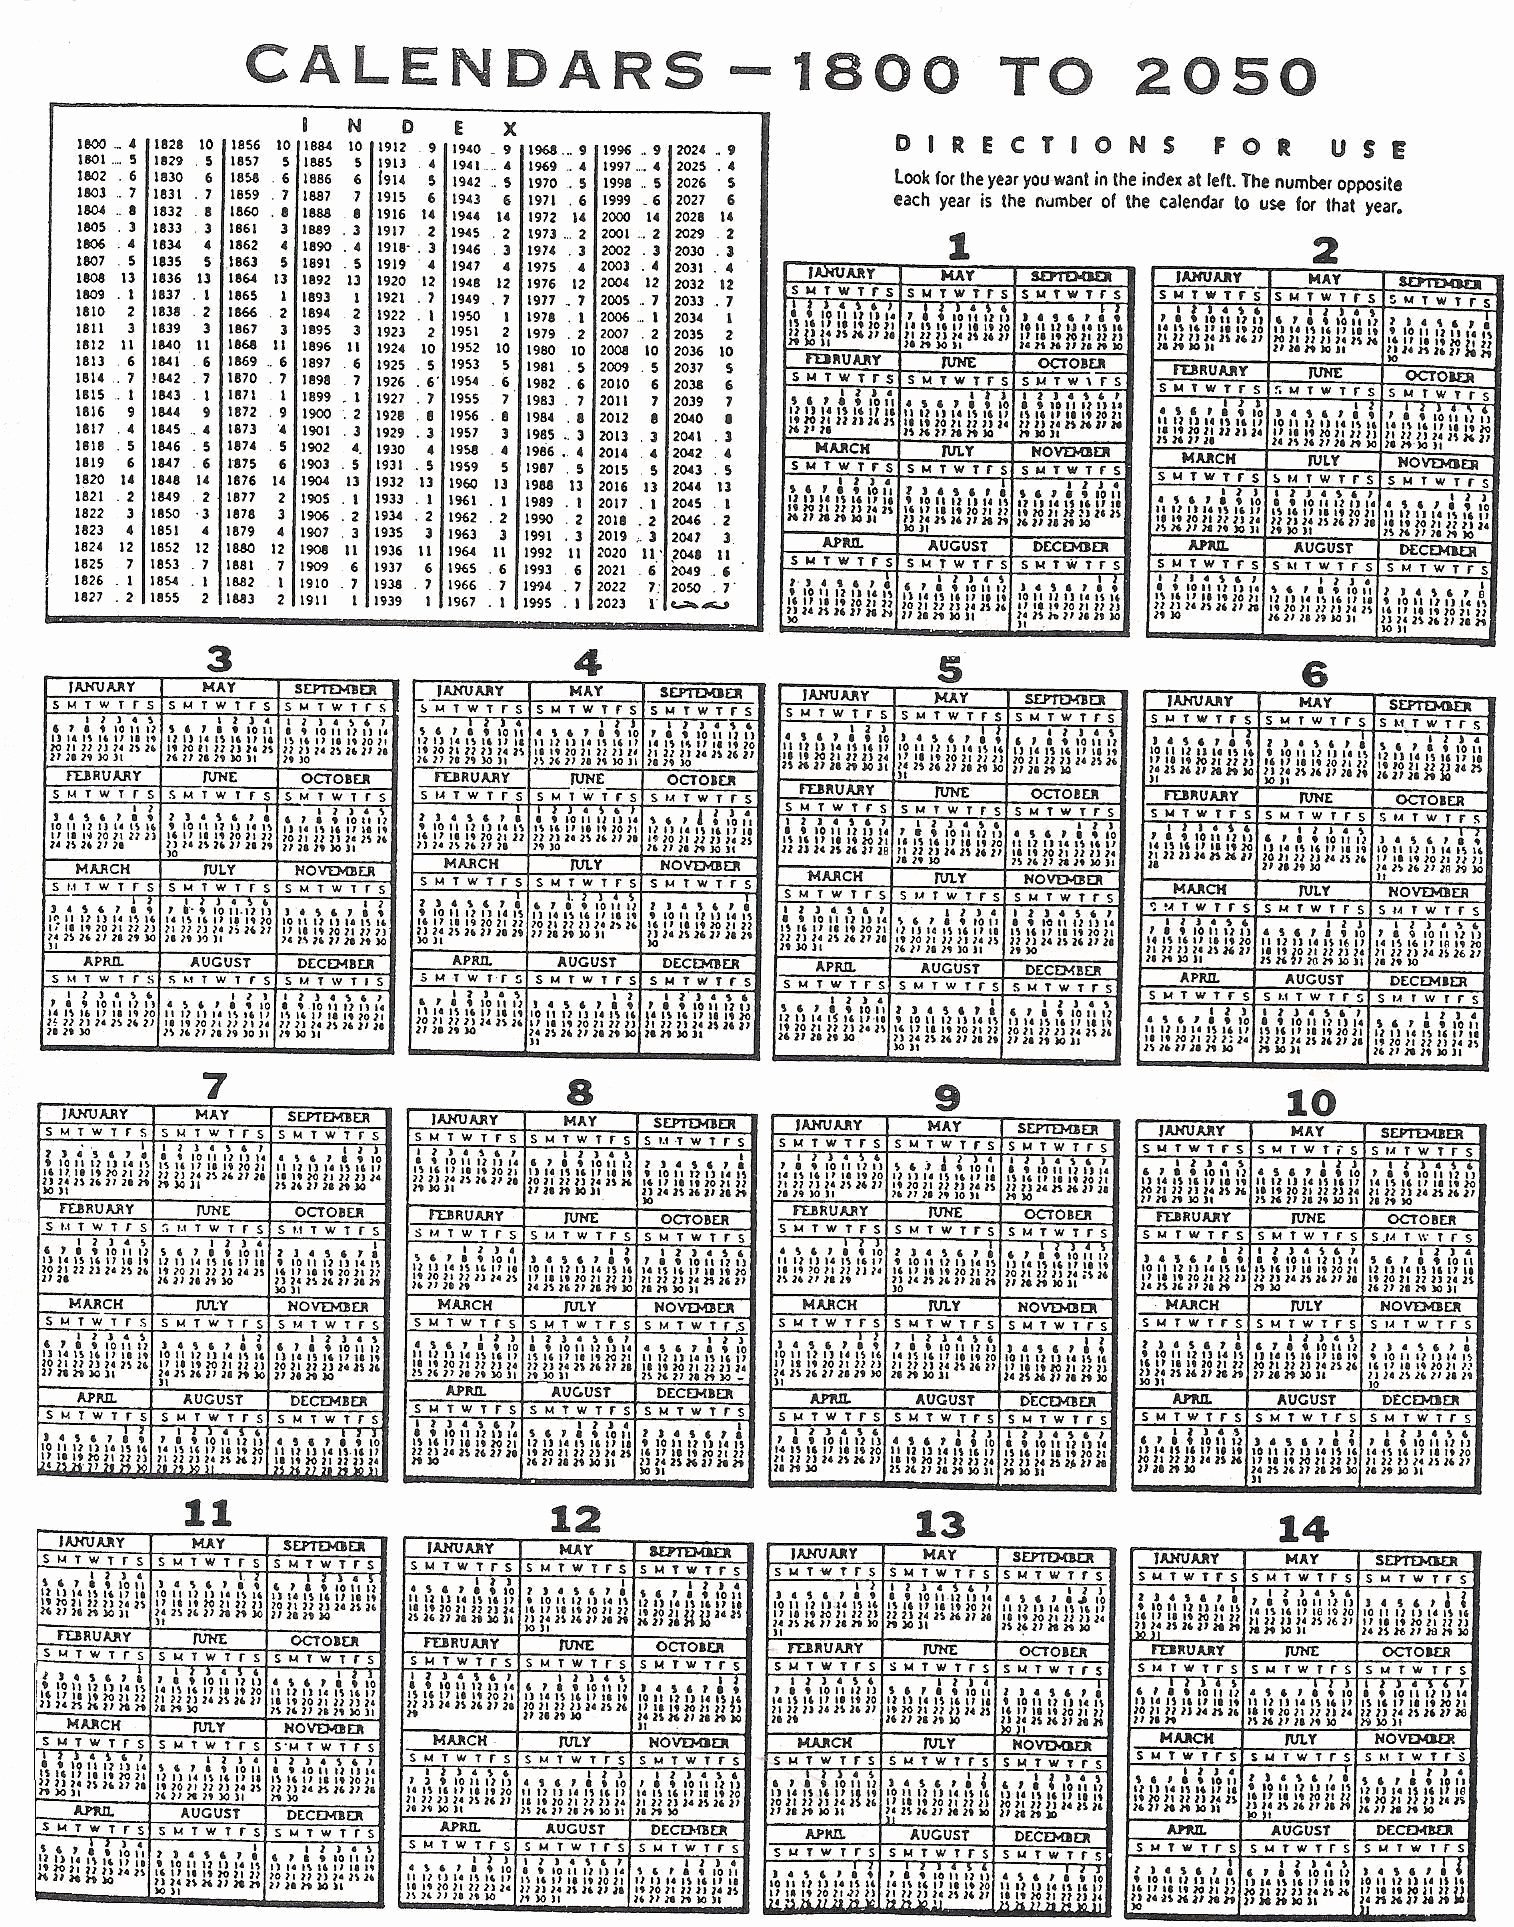 Free Printable Perpetual Calendar Best Of Perpetual Calendar 1800 to 2050 Look for the Year You